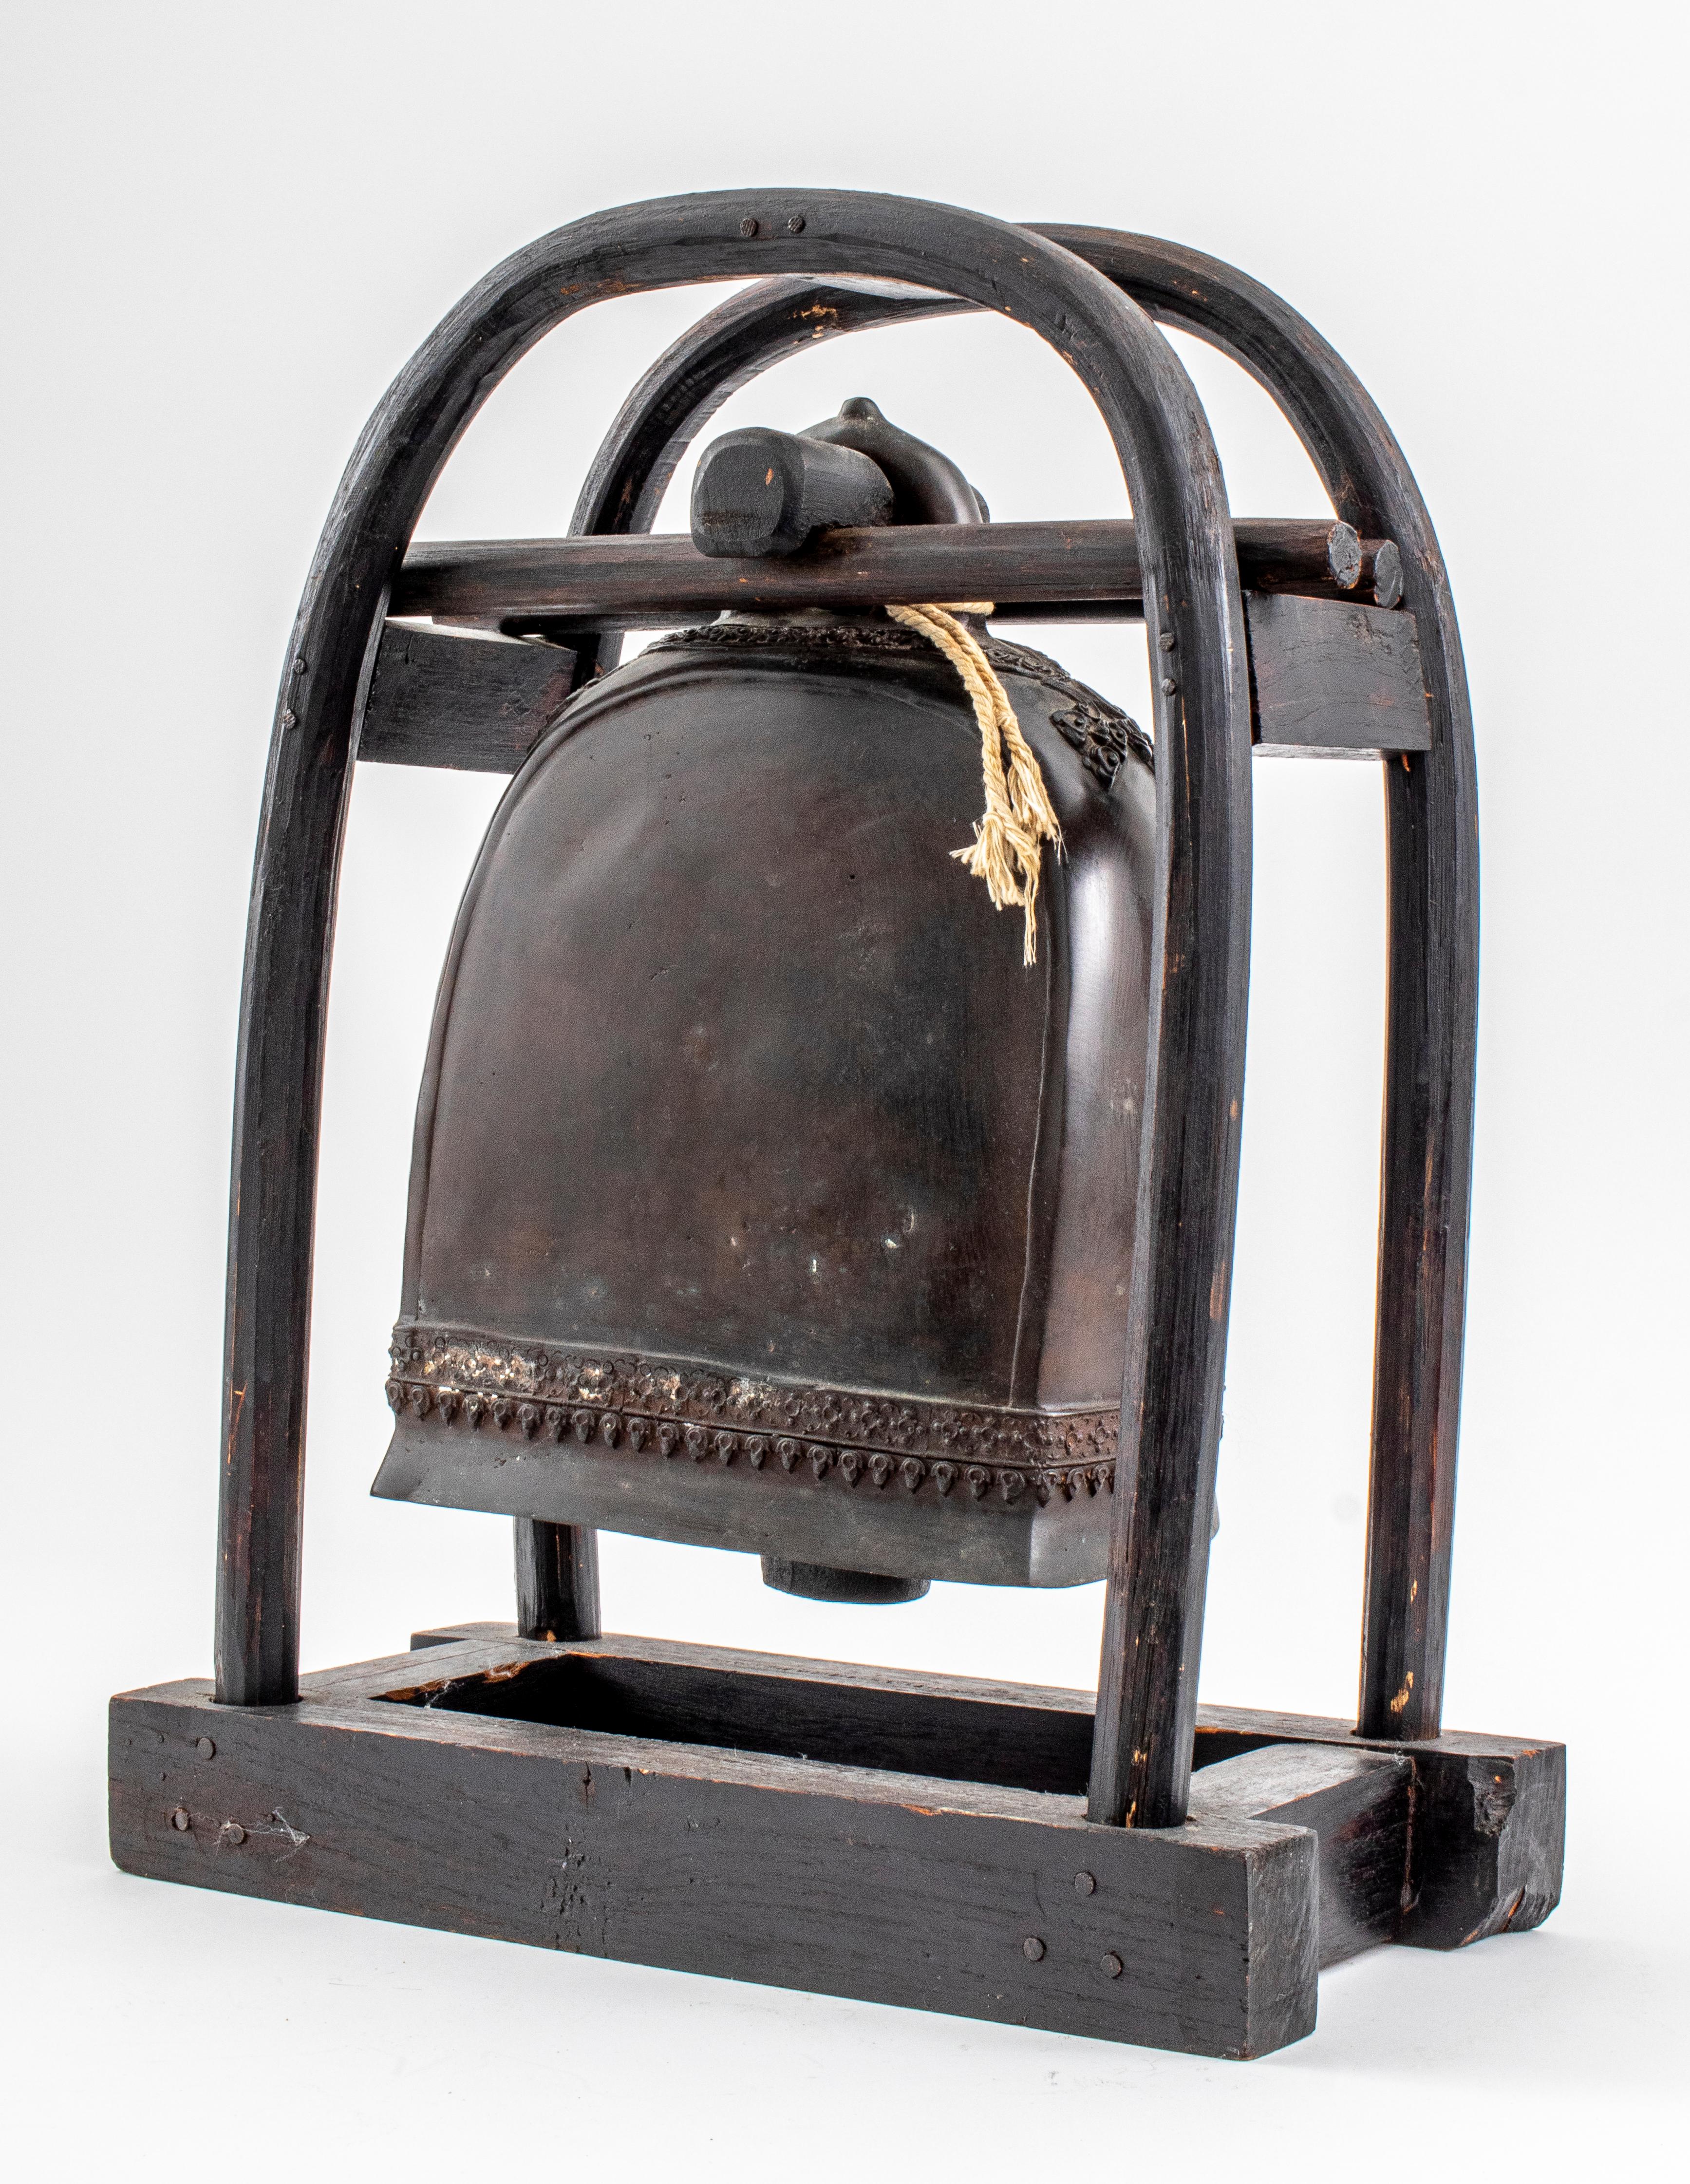 Southeast Asian, Indian or Thai, patinated bronze elephant bell gong cast with geometric borders at top and bottom, mounted in an ebonized wooden frame.
Measurements: 18